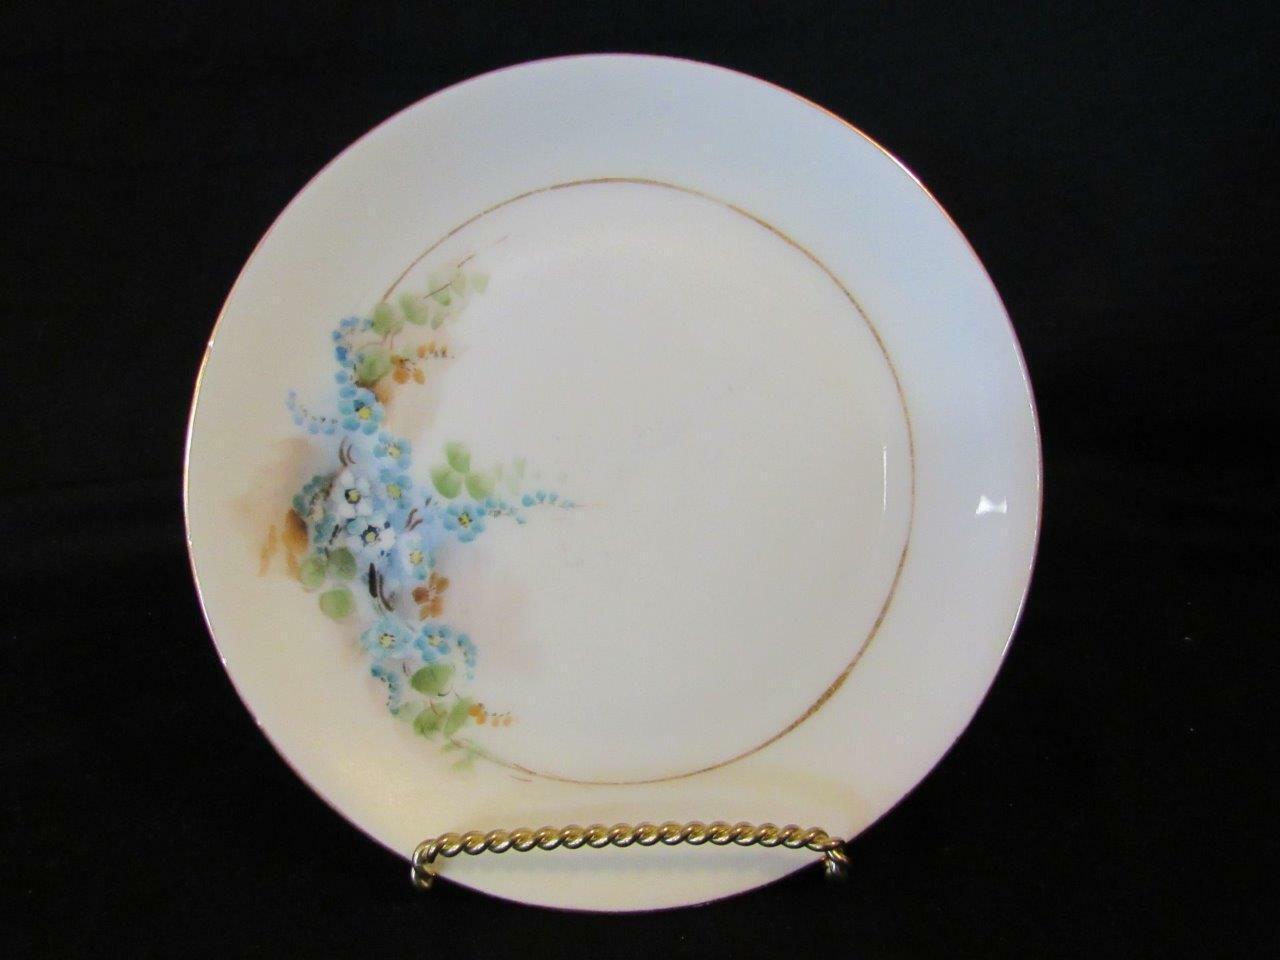 Primary image for Bavarian UNO Favorite Hand Painted Floral Plate, 6" Blue Forget Me Nots - Signed